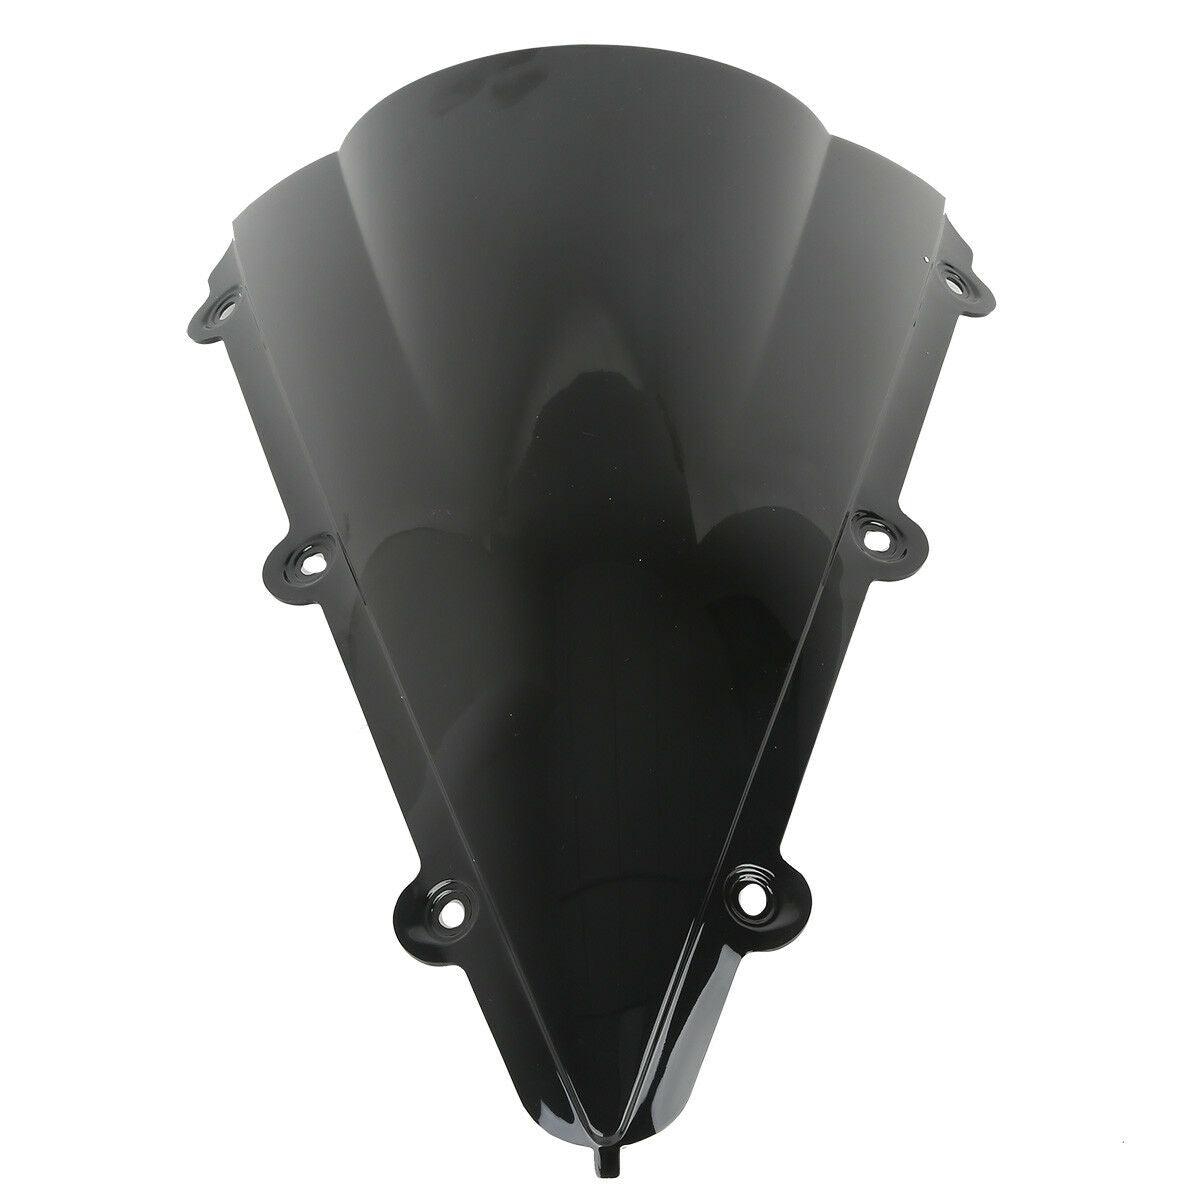 Motorcycle Black Windshield Windscreen Fit For YAMAHA YZF-R1 YZF R1 04-06 - Moto Life Products